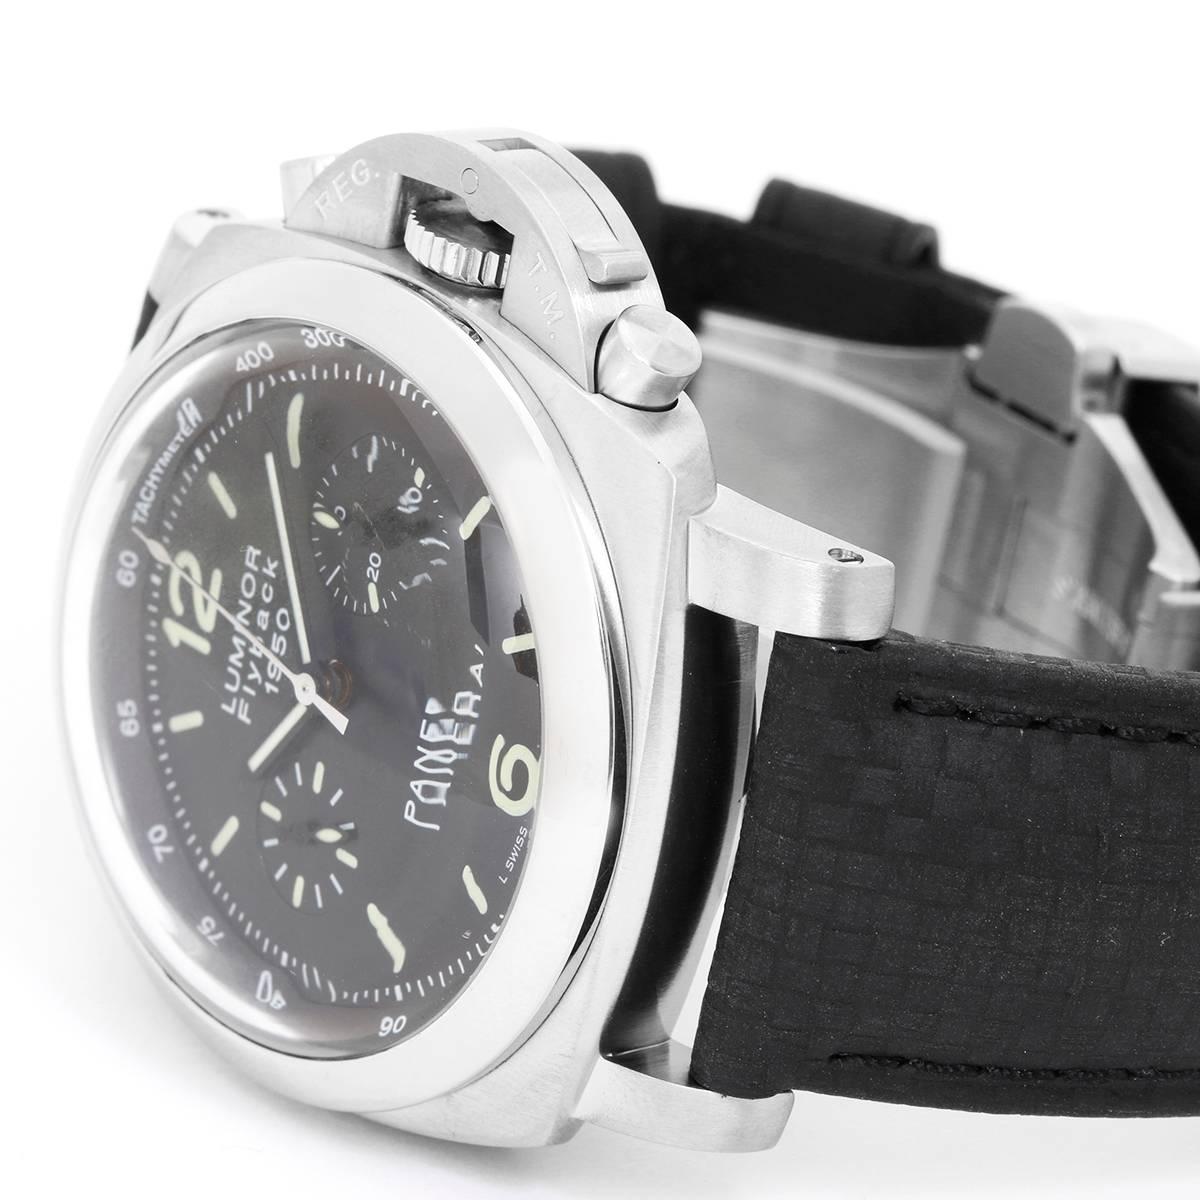 Panerai Luminor GMT 1950 Men's Stainless Steel Watch PAM 212 (PAM00212) -   Automatic winding chronograph with flyback function. Stainless steel case with exposition back  (44mm diameter). Black dial with luminous style markers and Arabic numerals